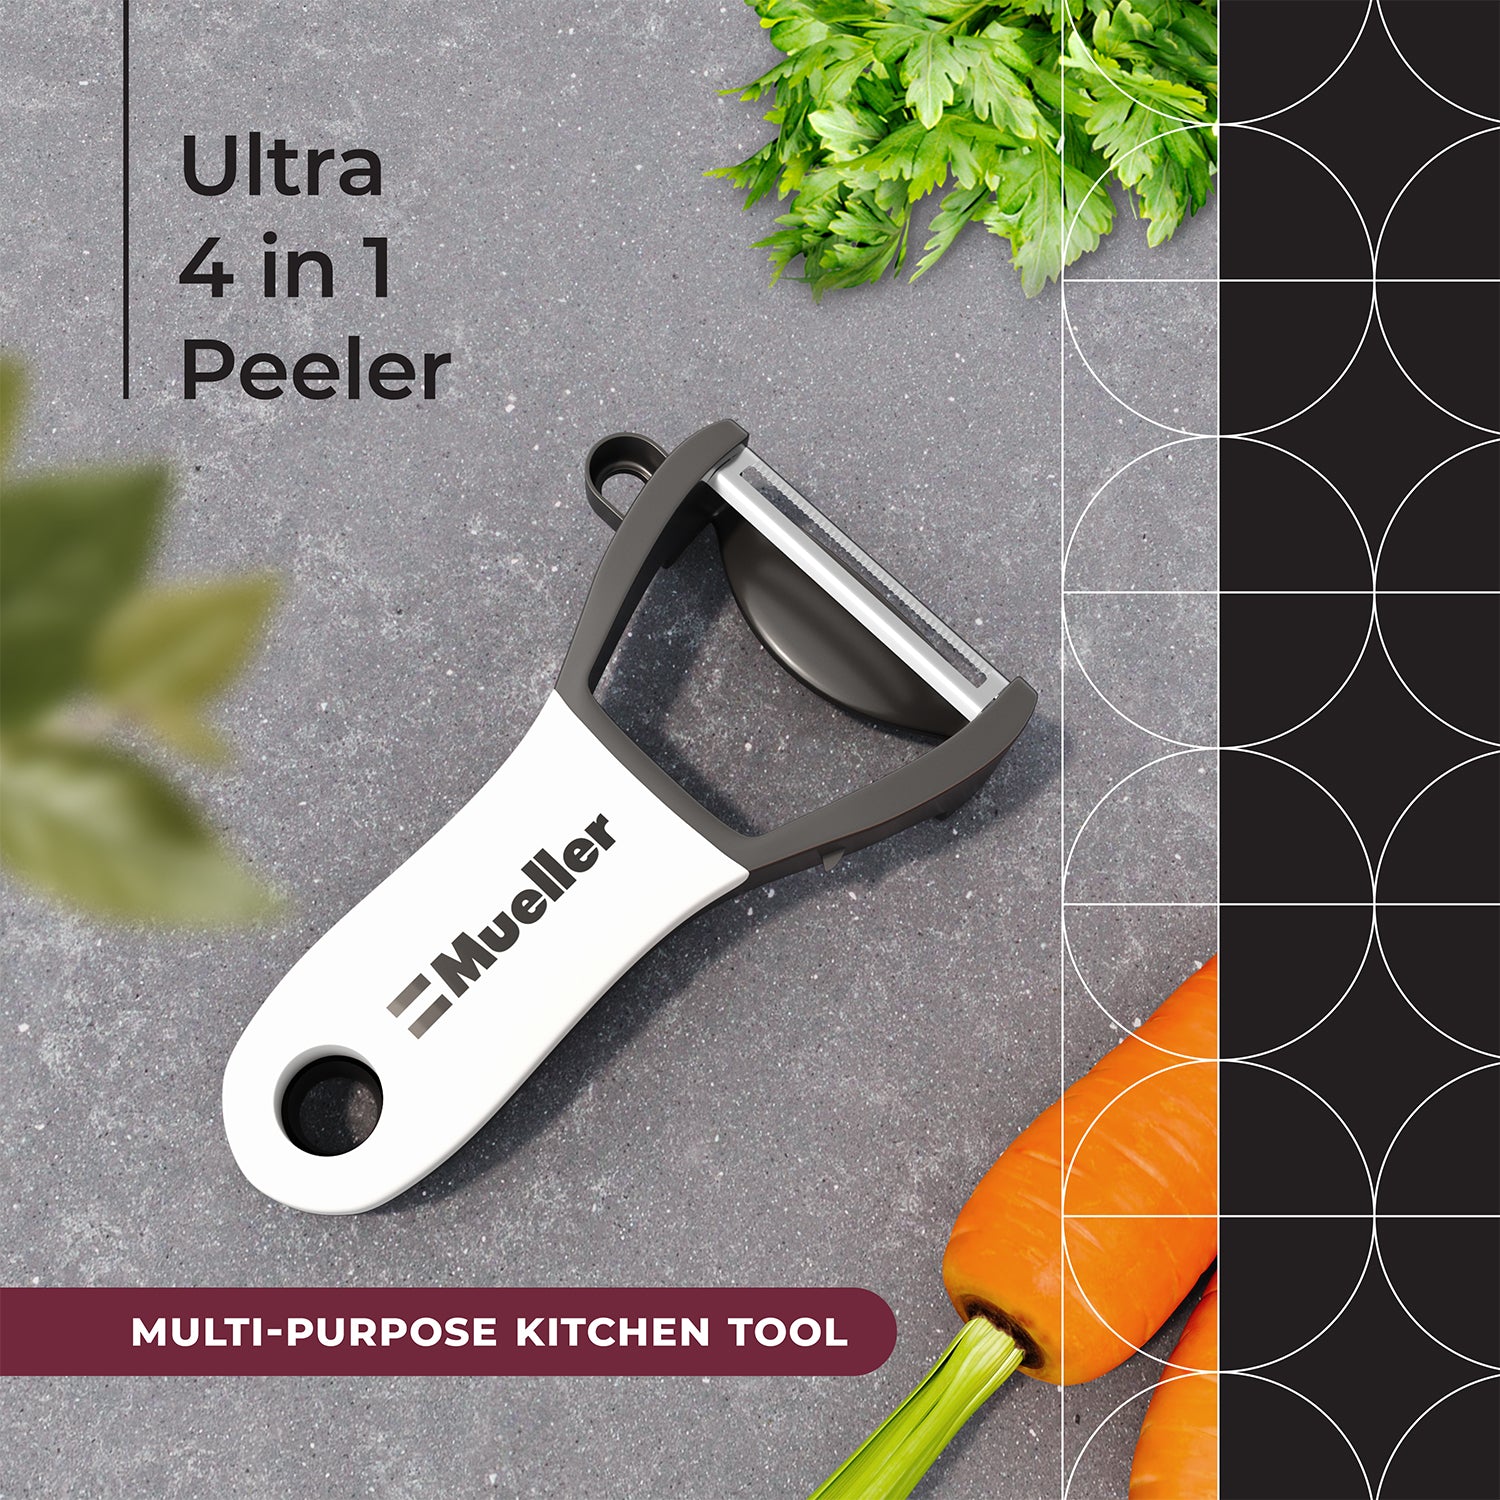 Citrus Peeler - The Best Peeler We Have Ever Used